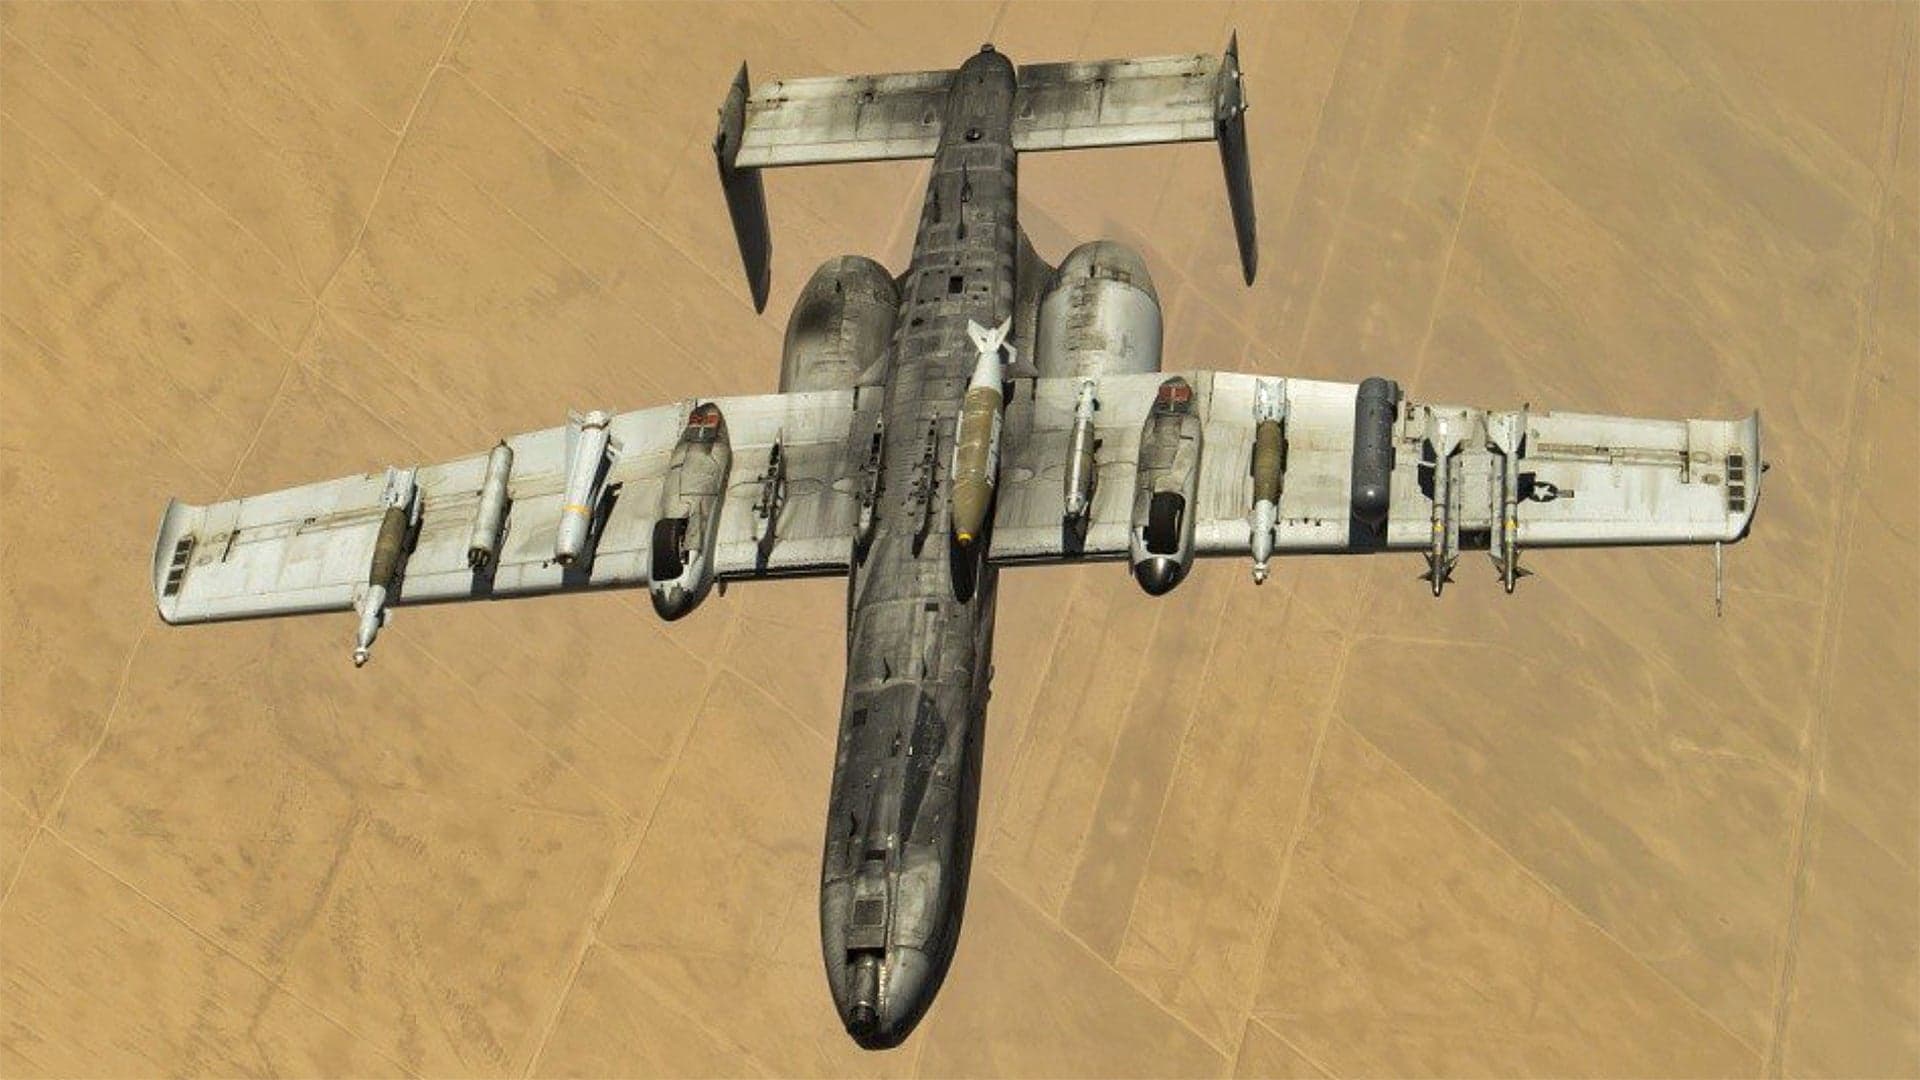 The Best Hog Is A Filthy Hog: If USAF Had Its Way This Jet Wouldn’t Be Devouring ISIS